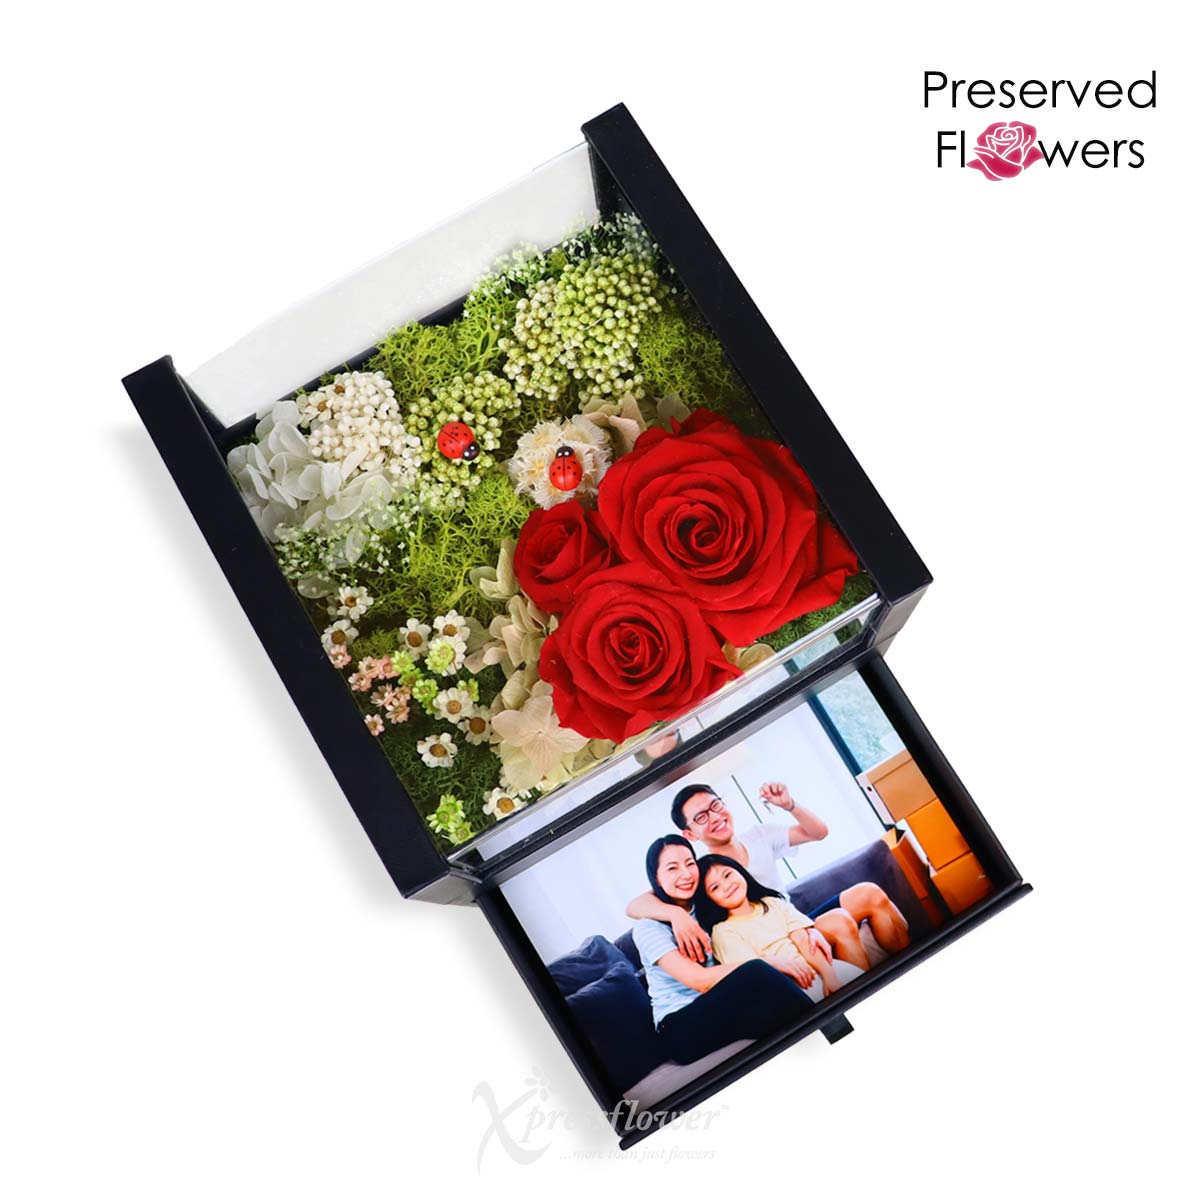 Queen’s Pursuit (Preserved Flowers with Personalised Photo)